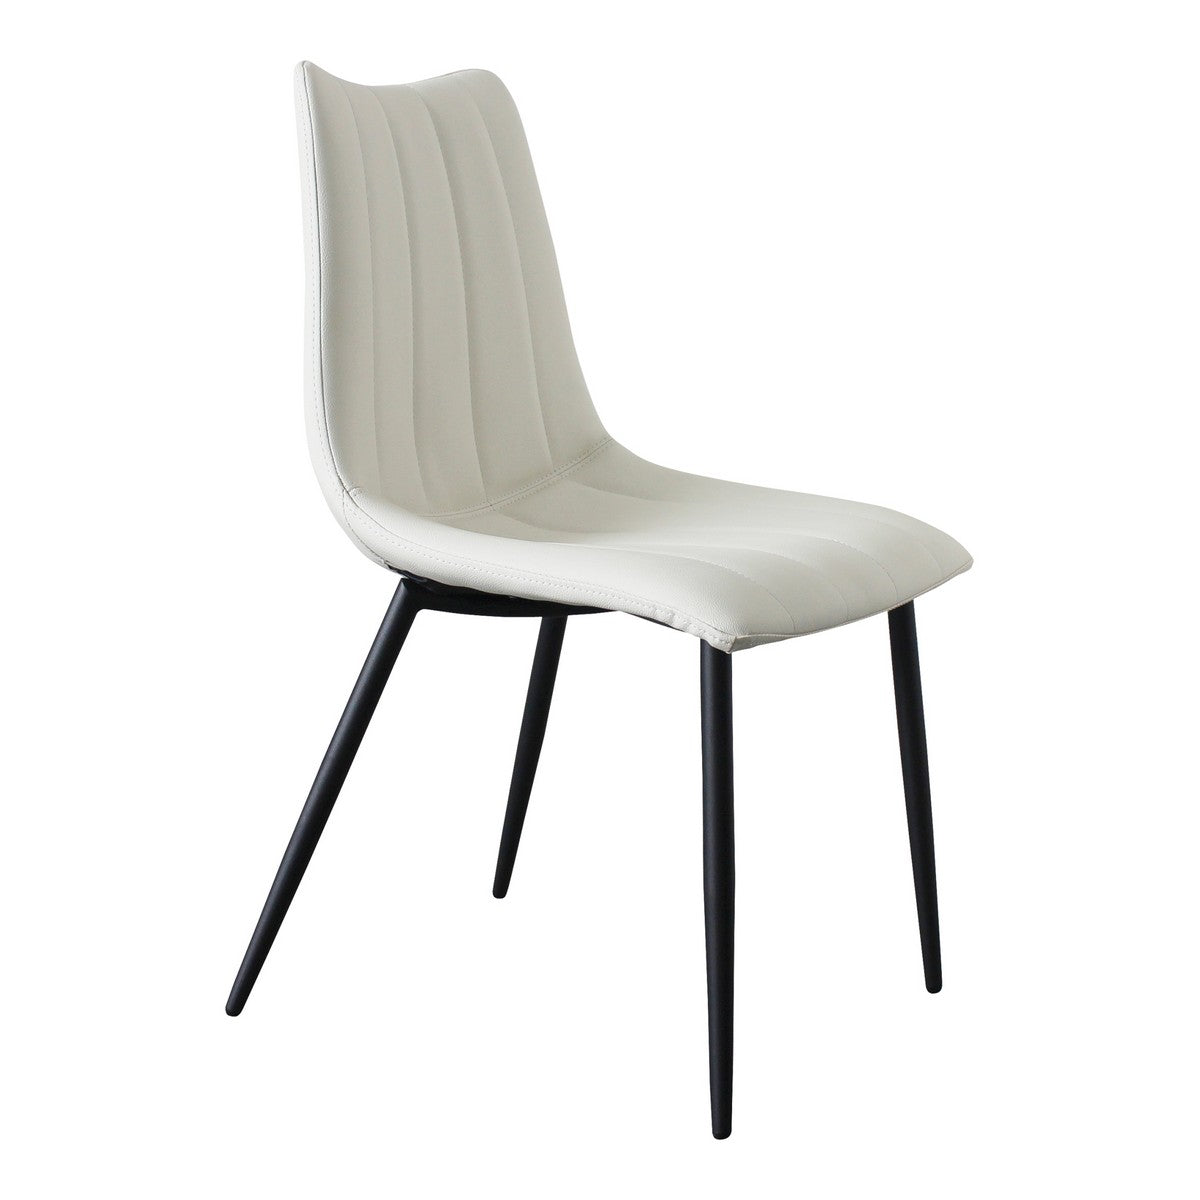 Moe's Home Collection Alibi Dining Chair Ivory-Set of Two - UU-1022-05